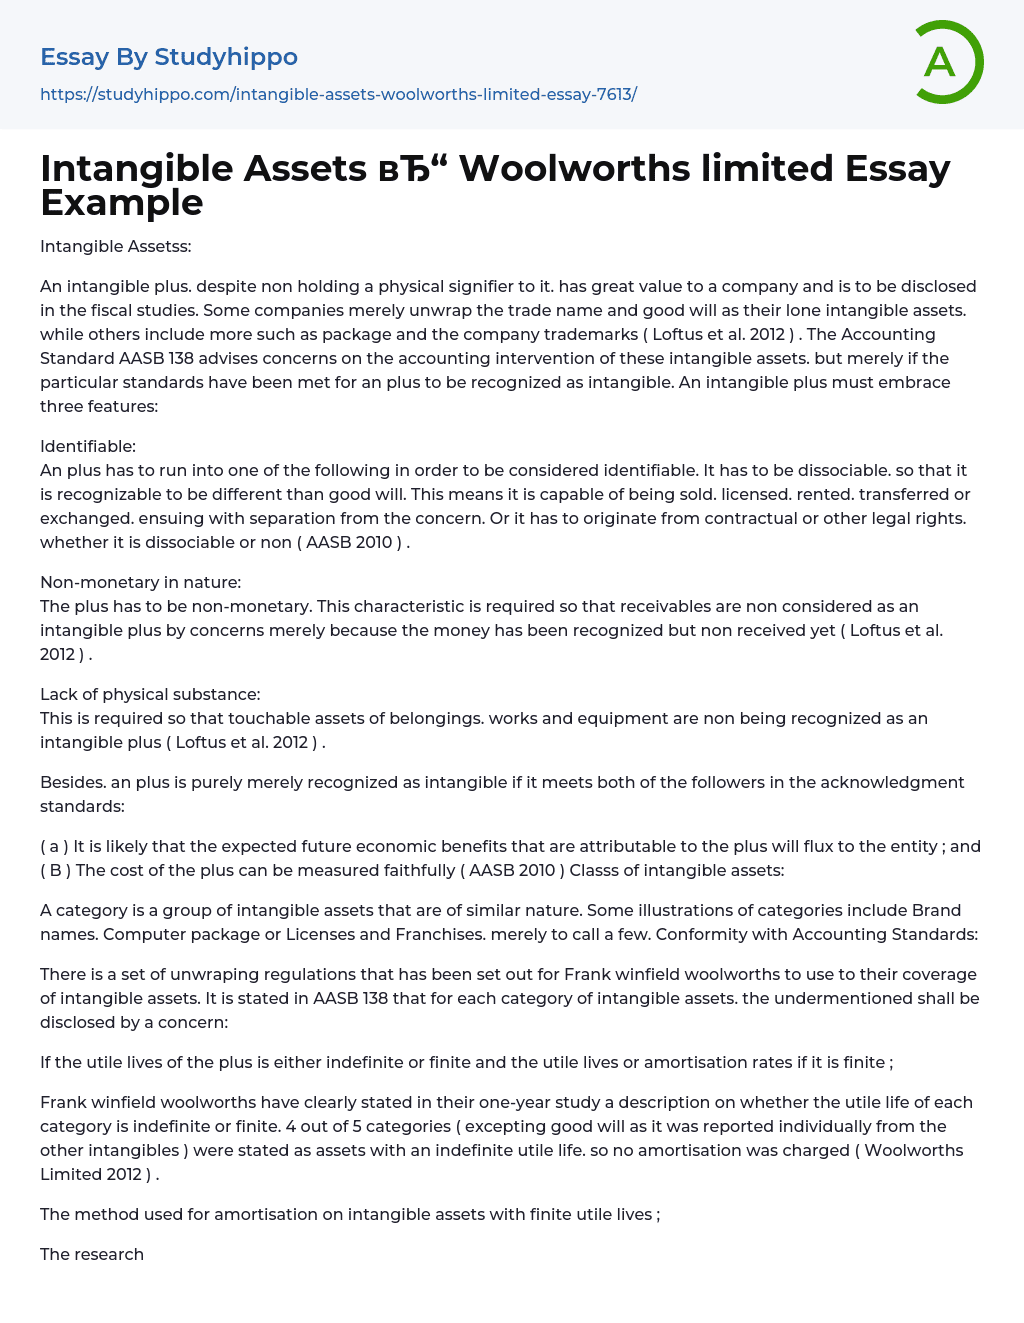 Intangible Assets Woolworths limited Essay Example